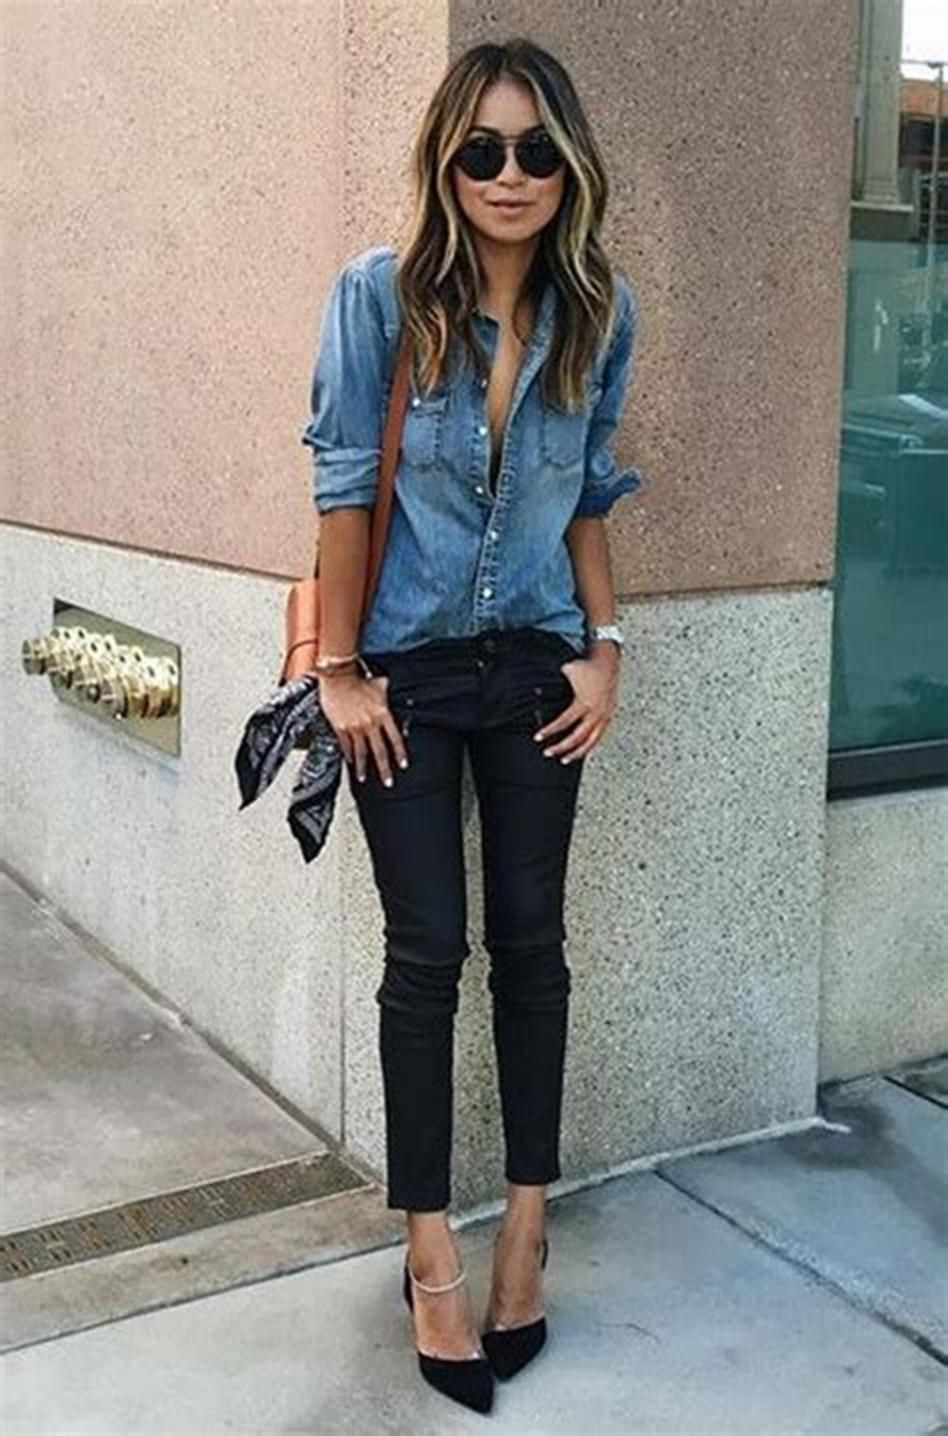 29 Stylish and Cute Casual Spring Outfits Ideas For Women 2020 - 29 Stylish and Cute Casual Spring Outfits Ideas For Women 2020 -   17 style Casual spring ideas